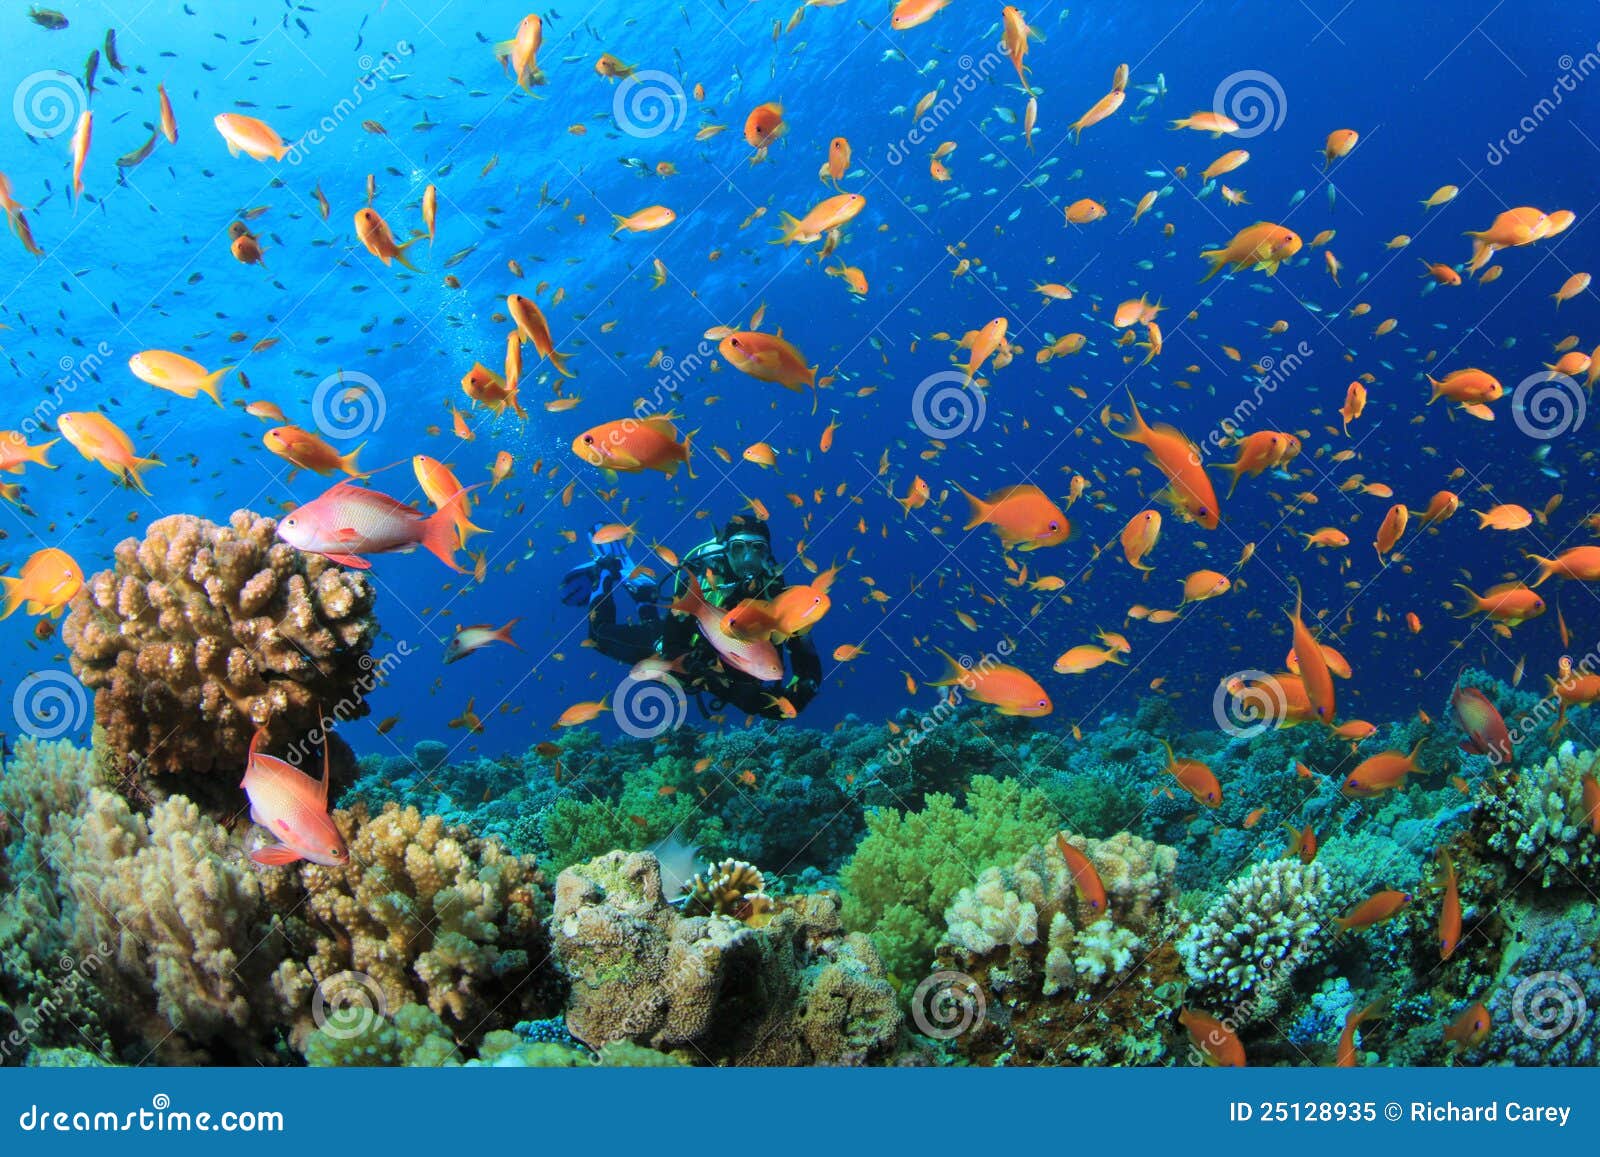 Scuba Diver and Tropical Fish Stock Image - Image of sharm, snapper ...